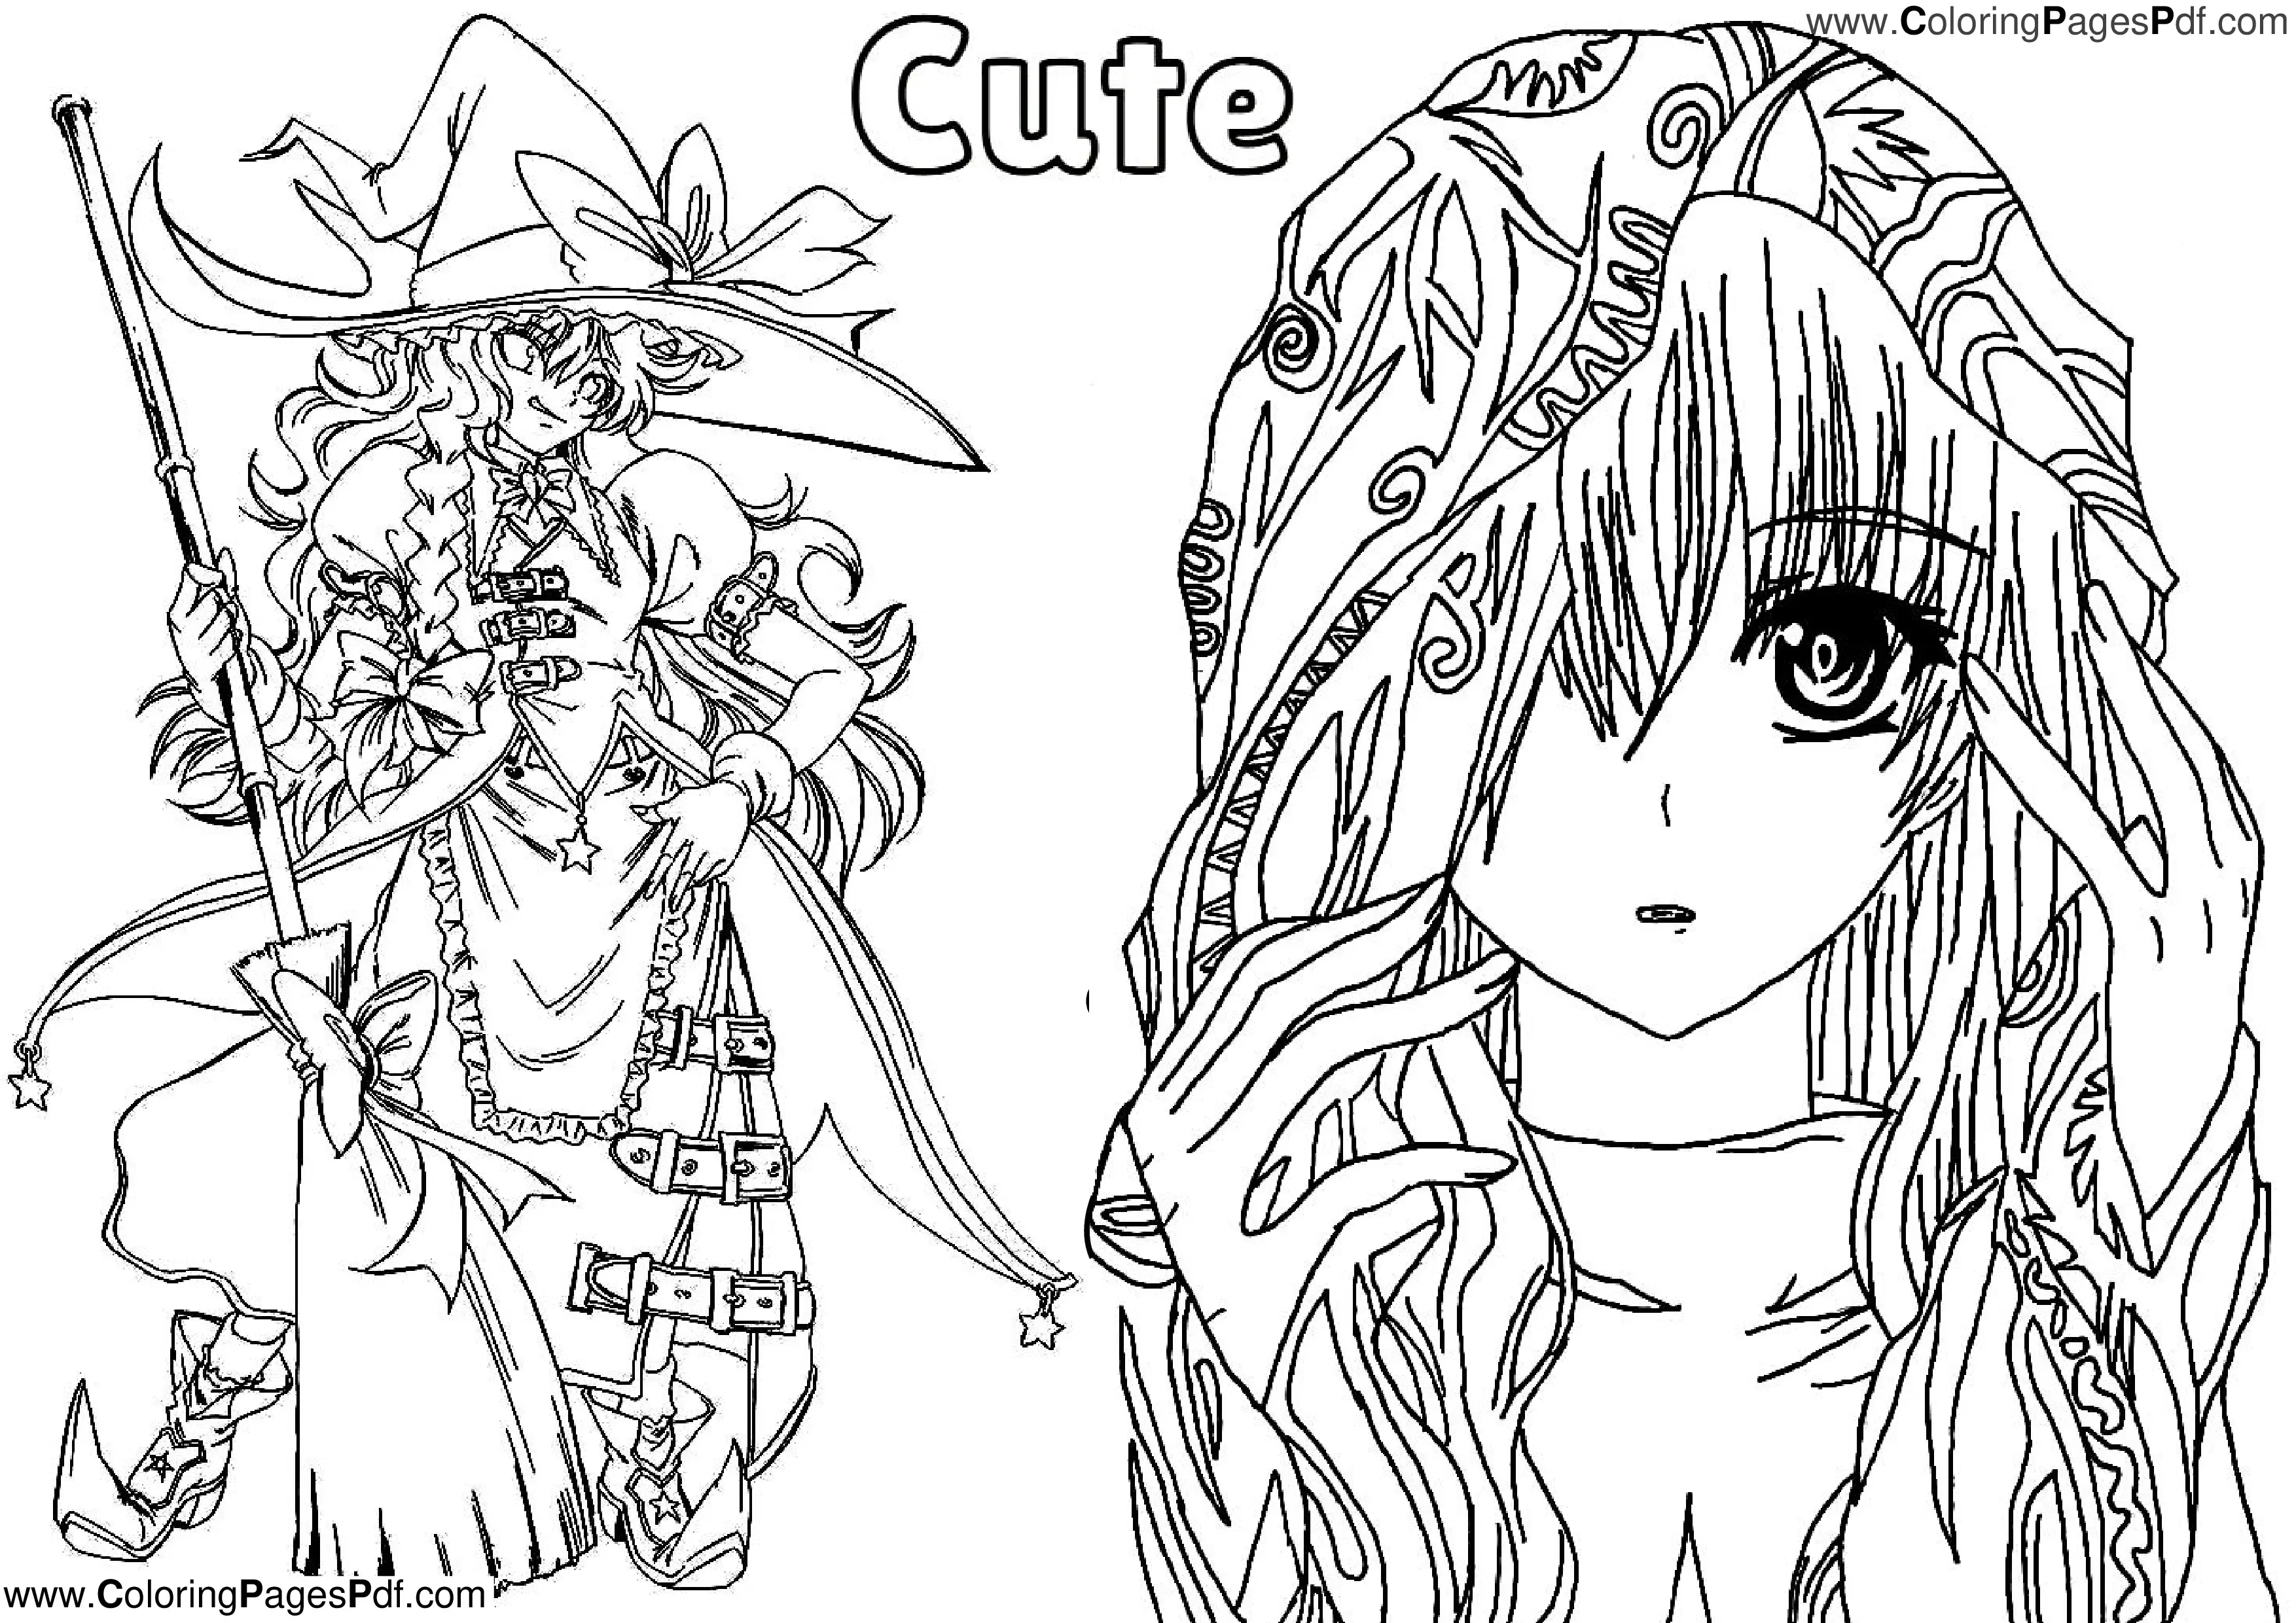 Anime colouring pages for girls